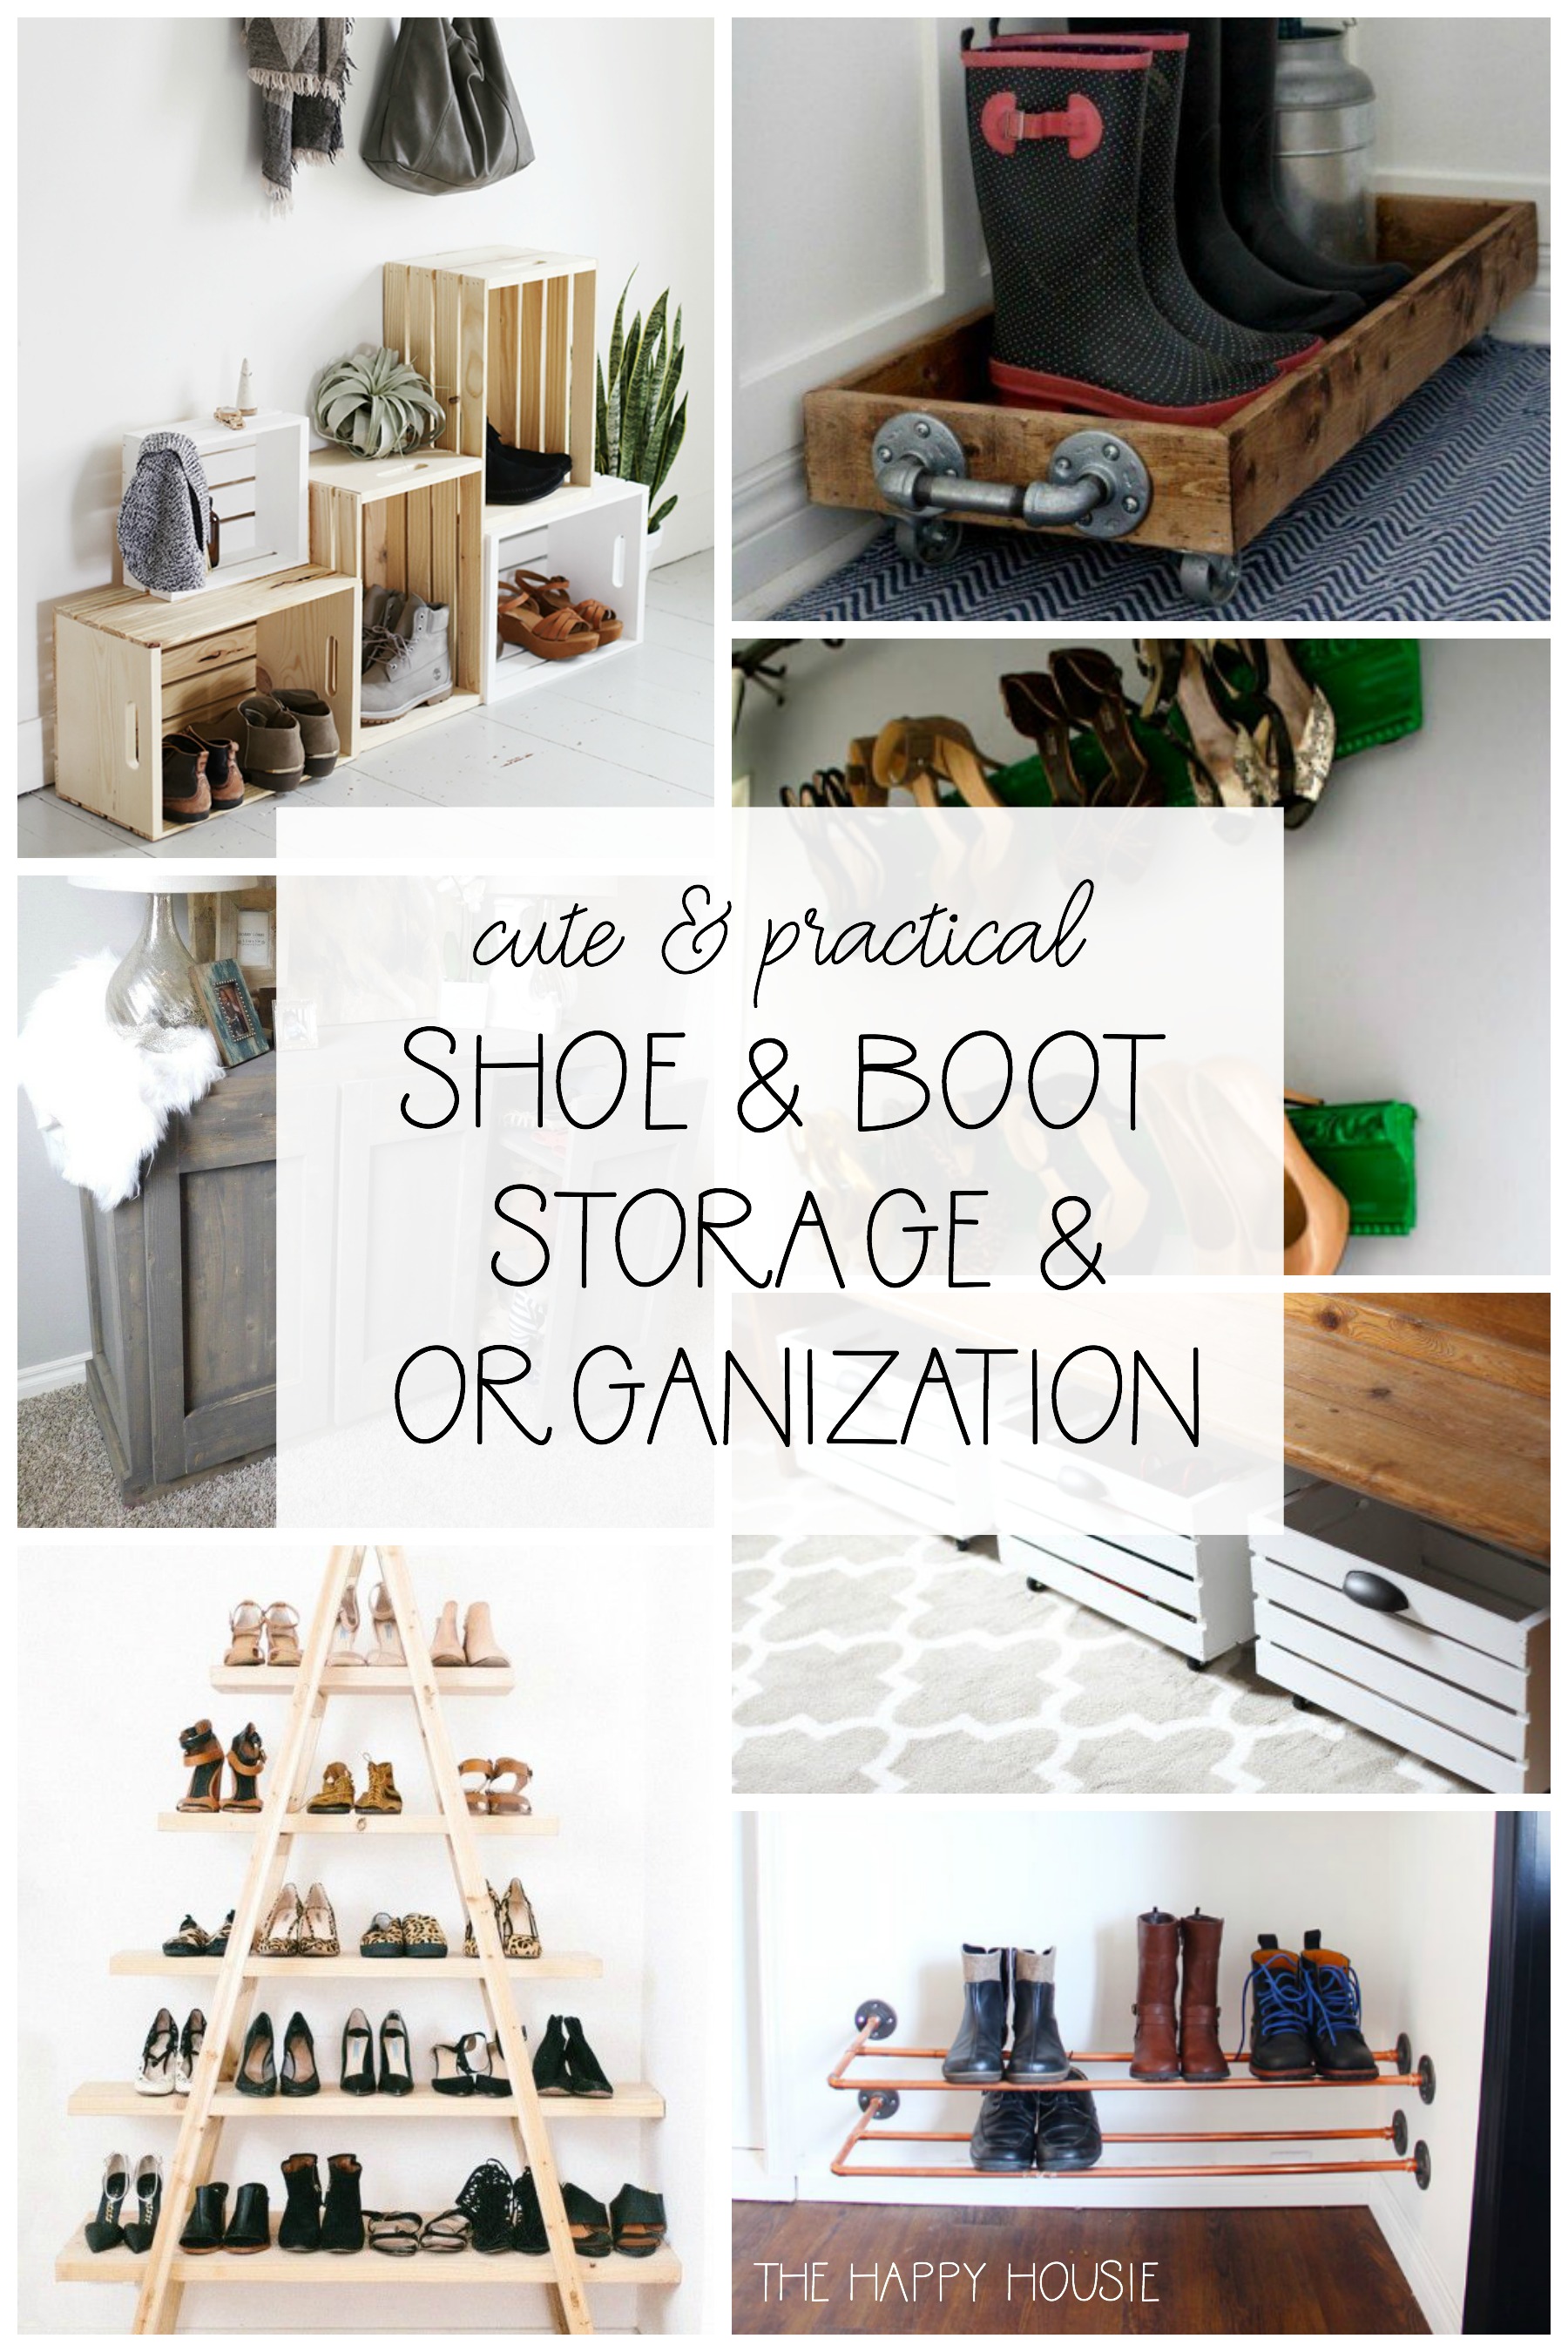 Cute and practical shoe and boot storage and organization graphic.